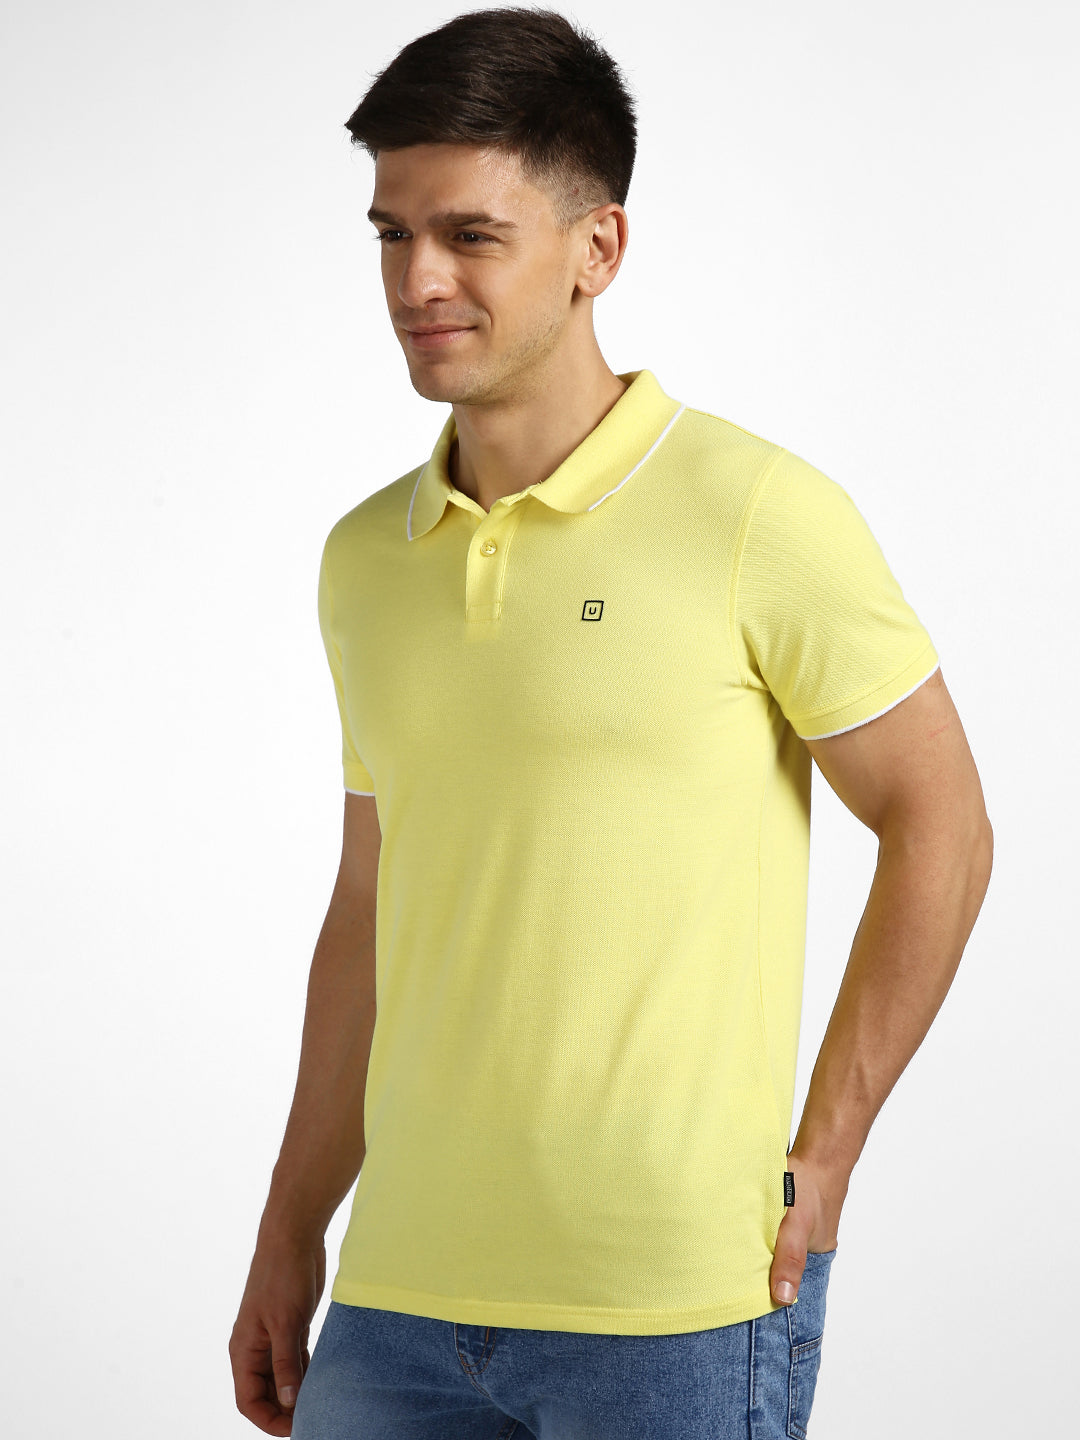 Men's Yellow Solid Slim Fit Half Sleeve Cotton Polo T-Shirt